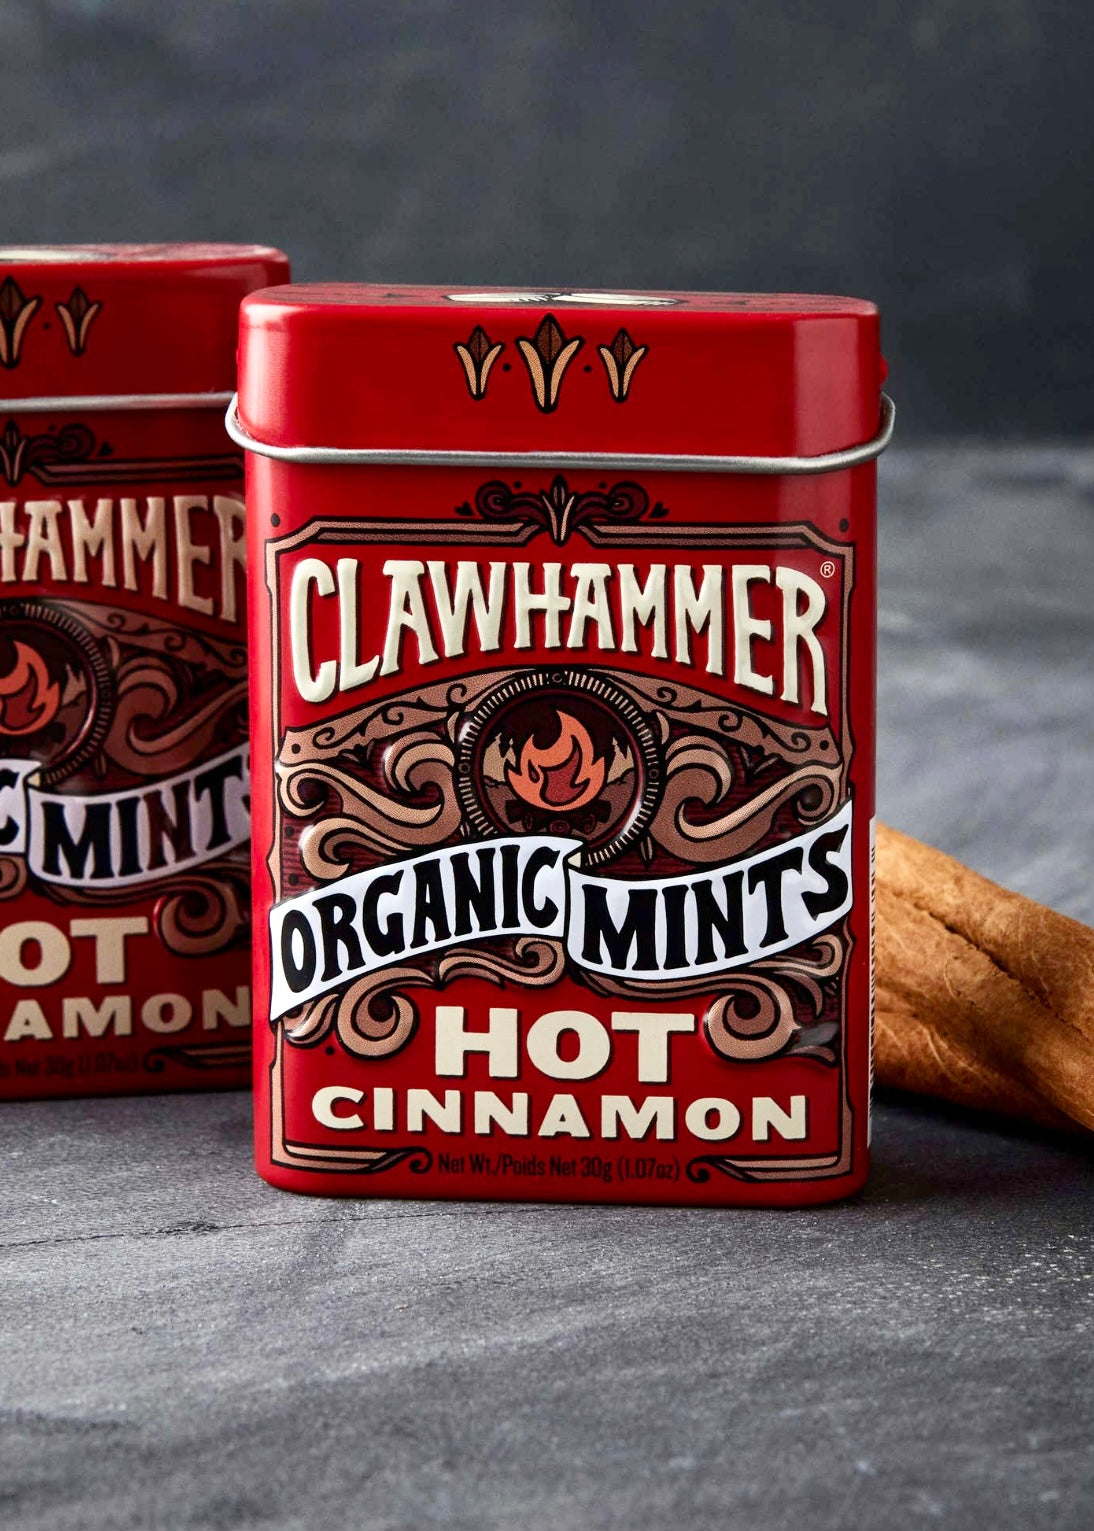 Hot Cinnamon Clawhammer Mints in Vintage Tin